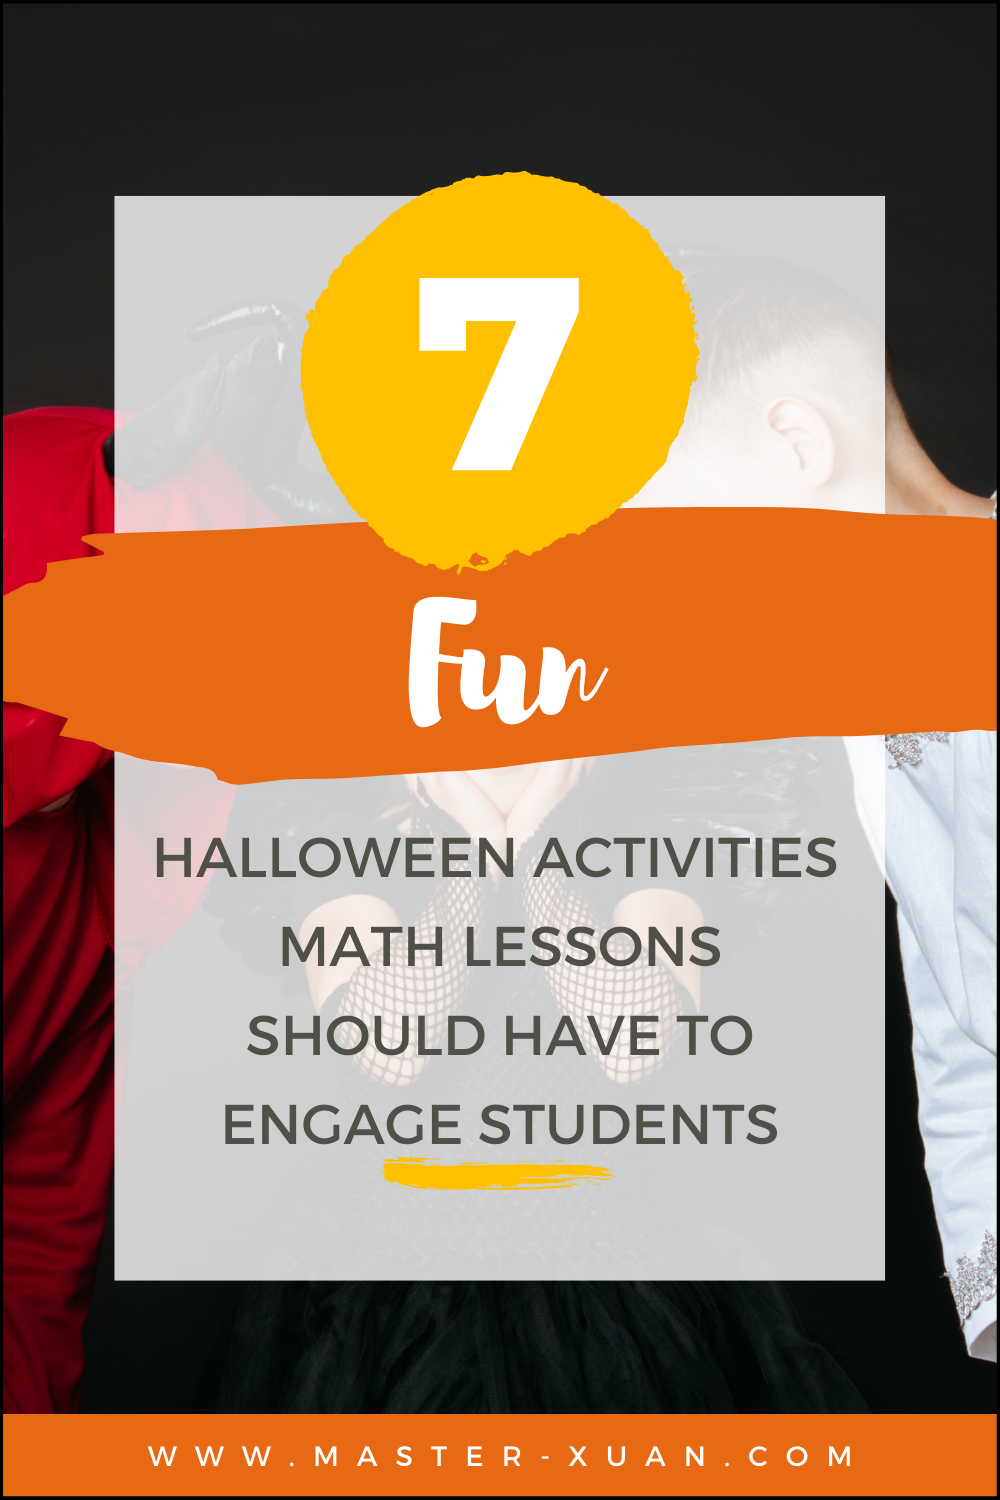 7 fun halloween activities math lessons should have to engage students